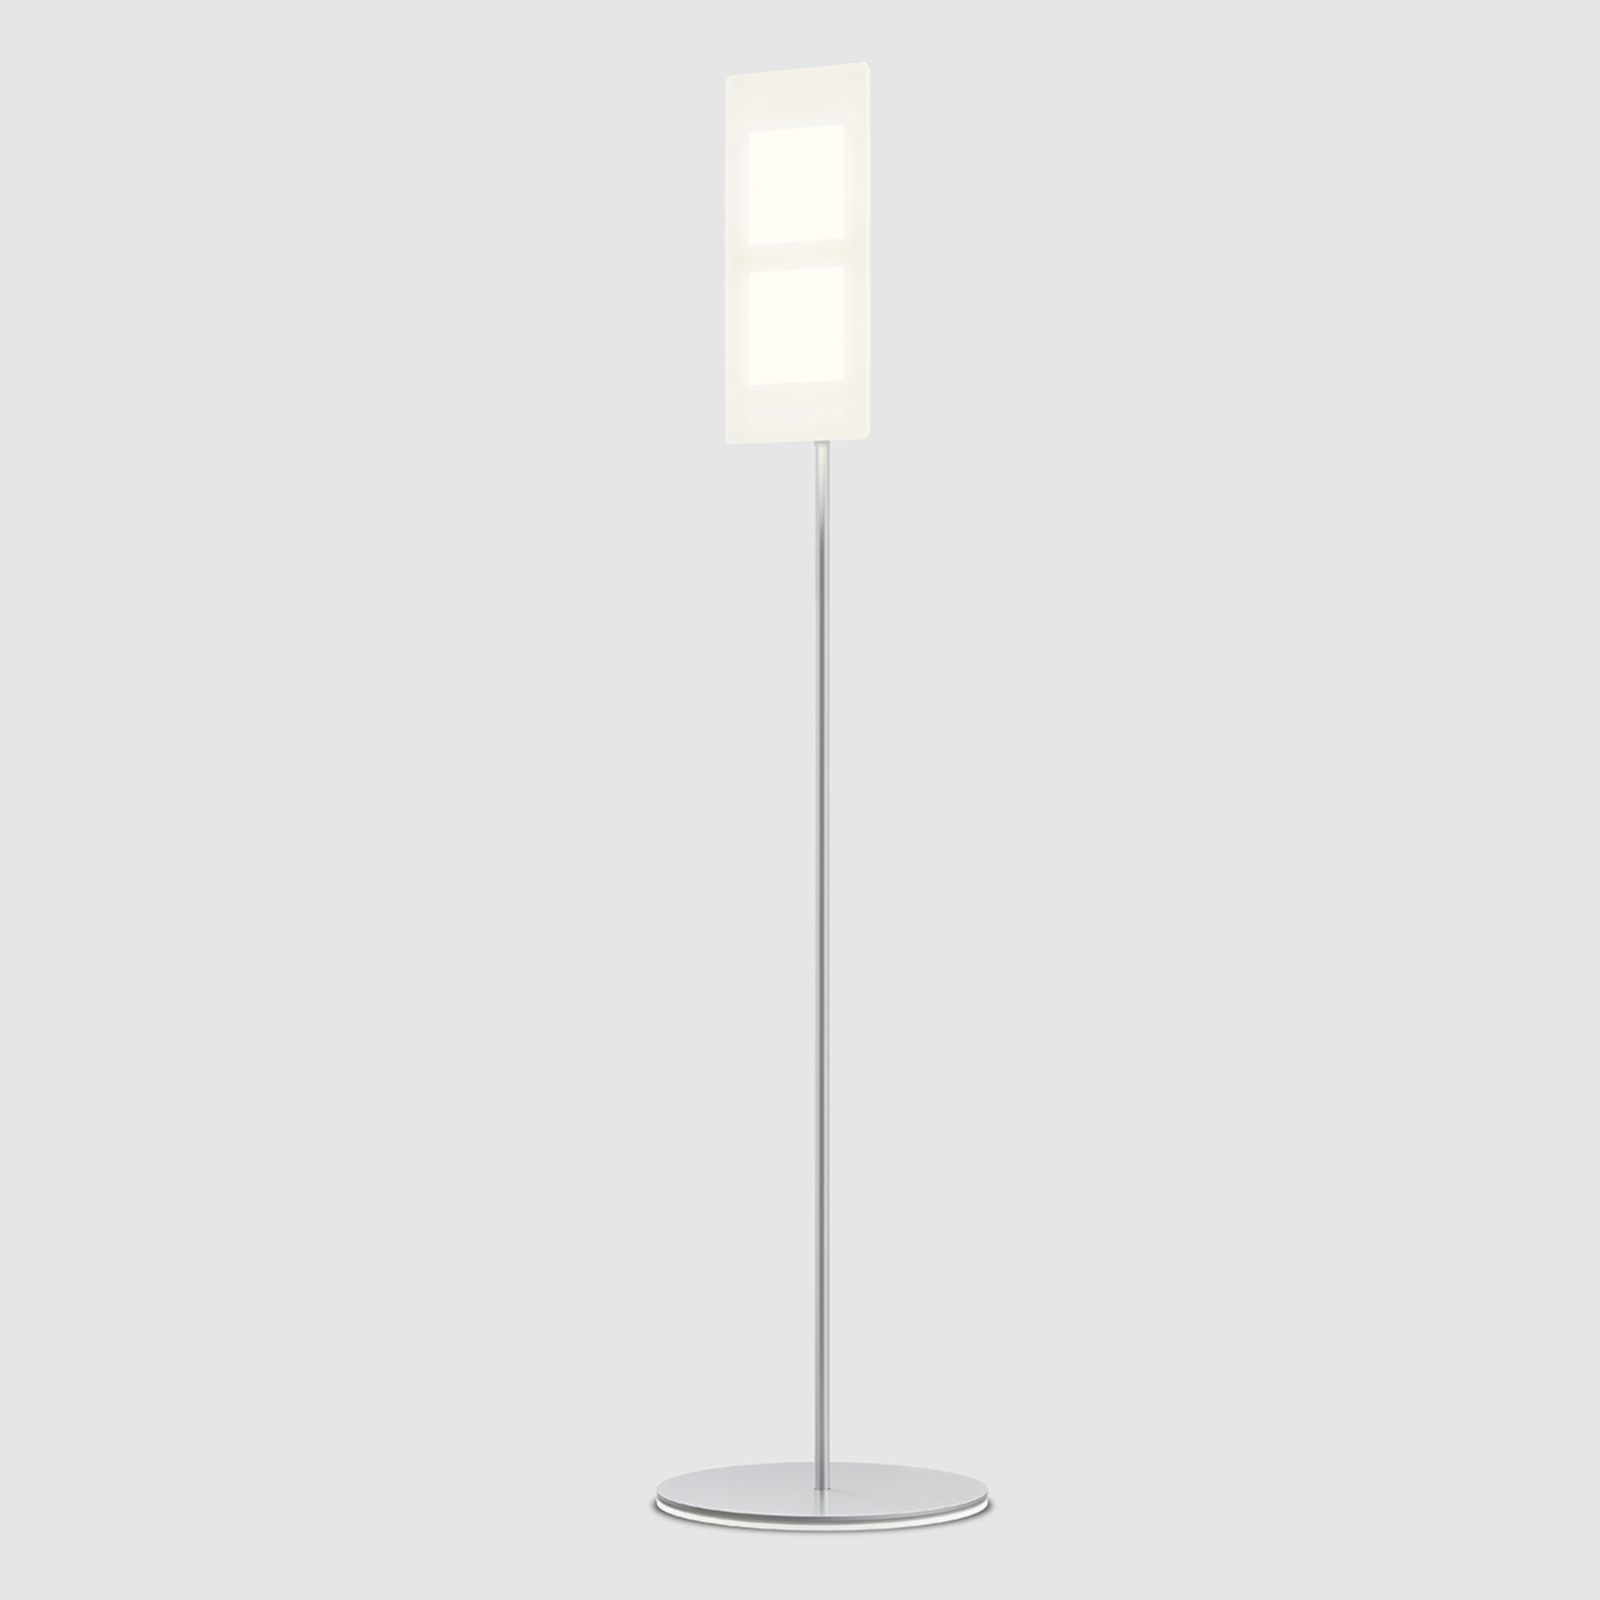 With OLEDs - floor lamp OMLED One f2 black